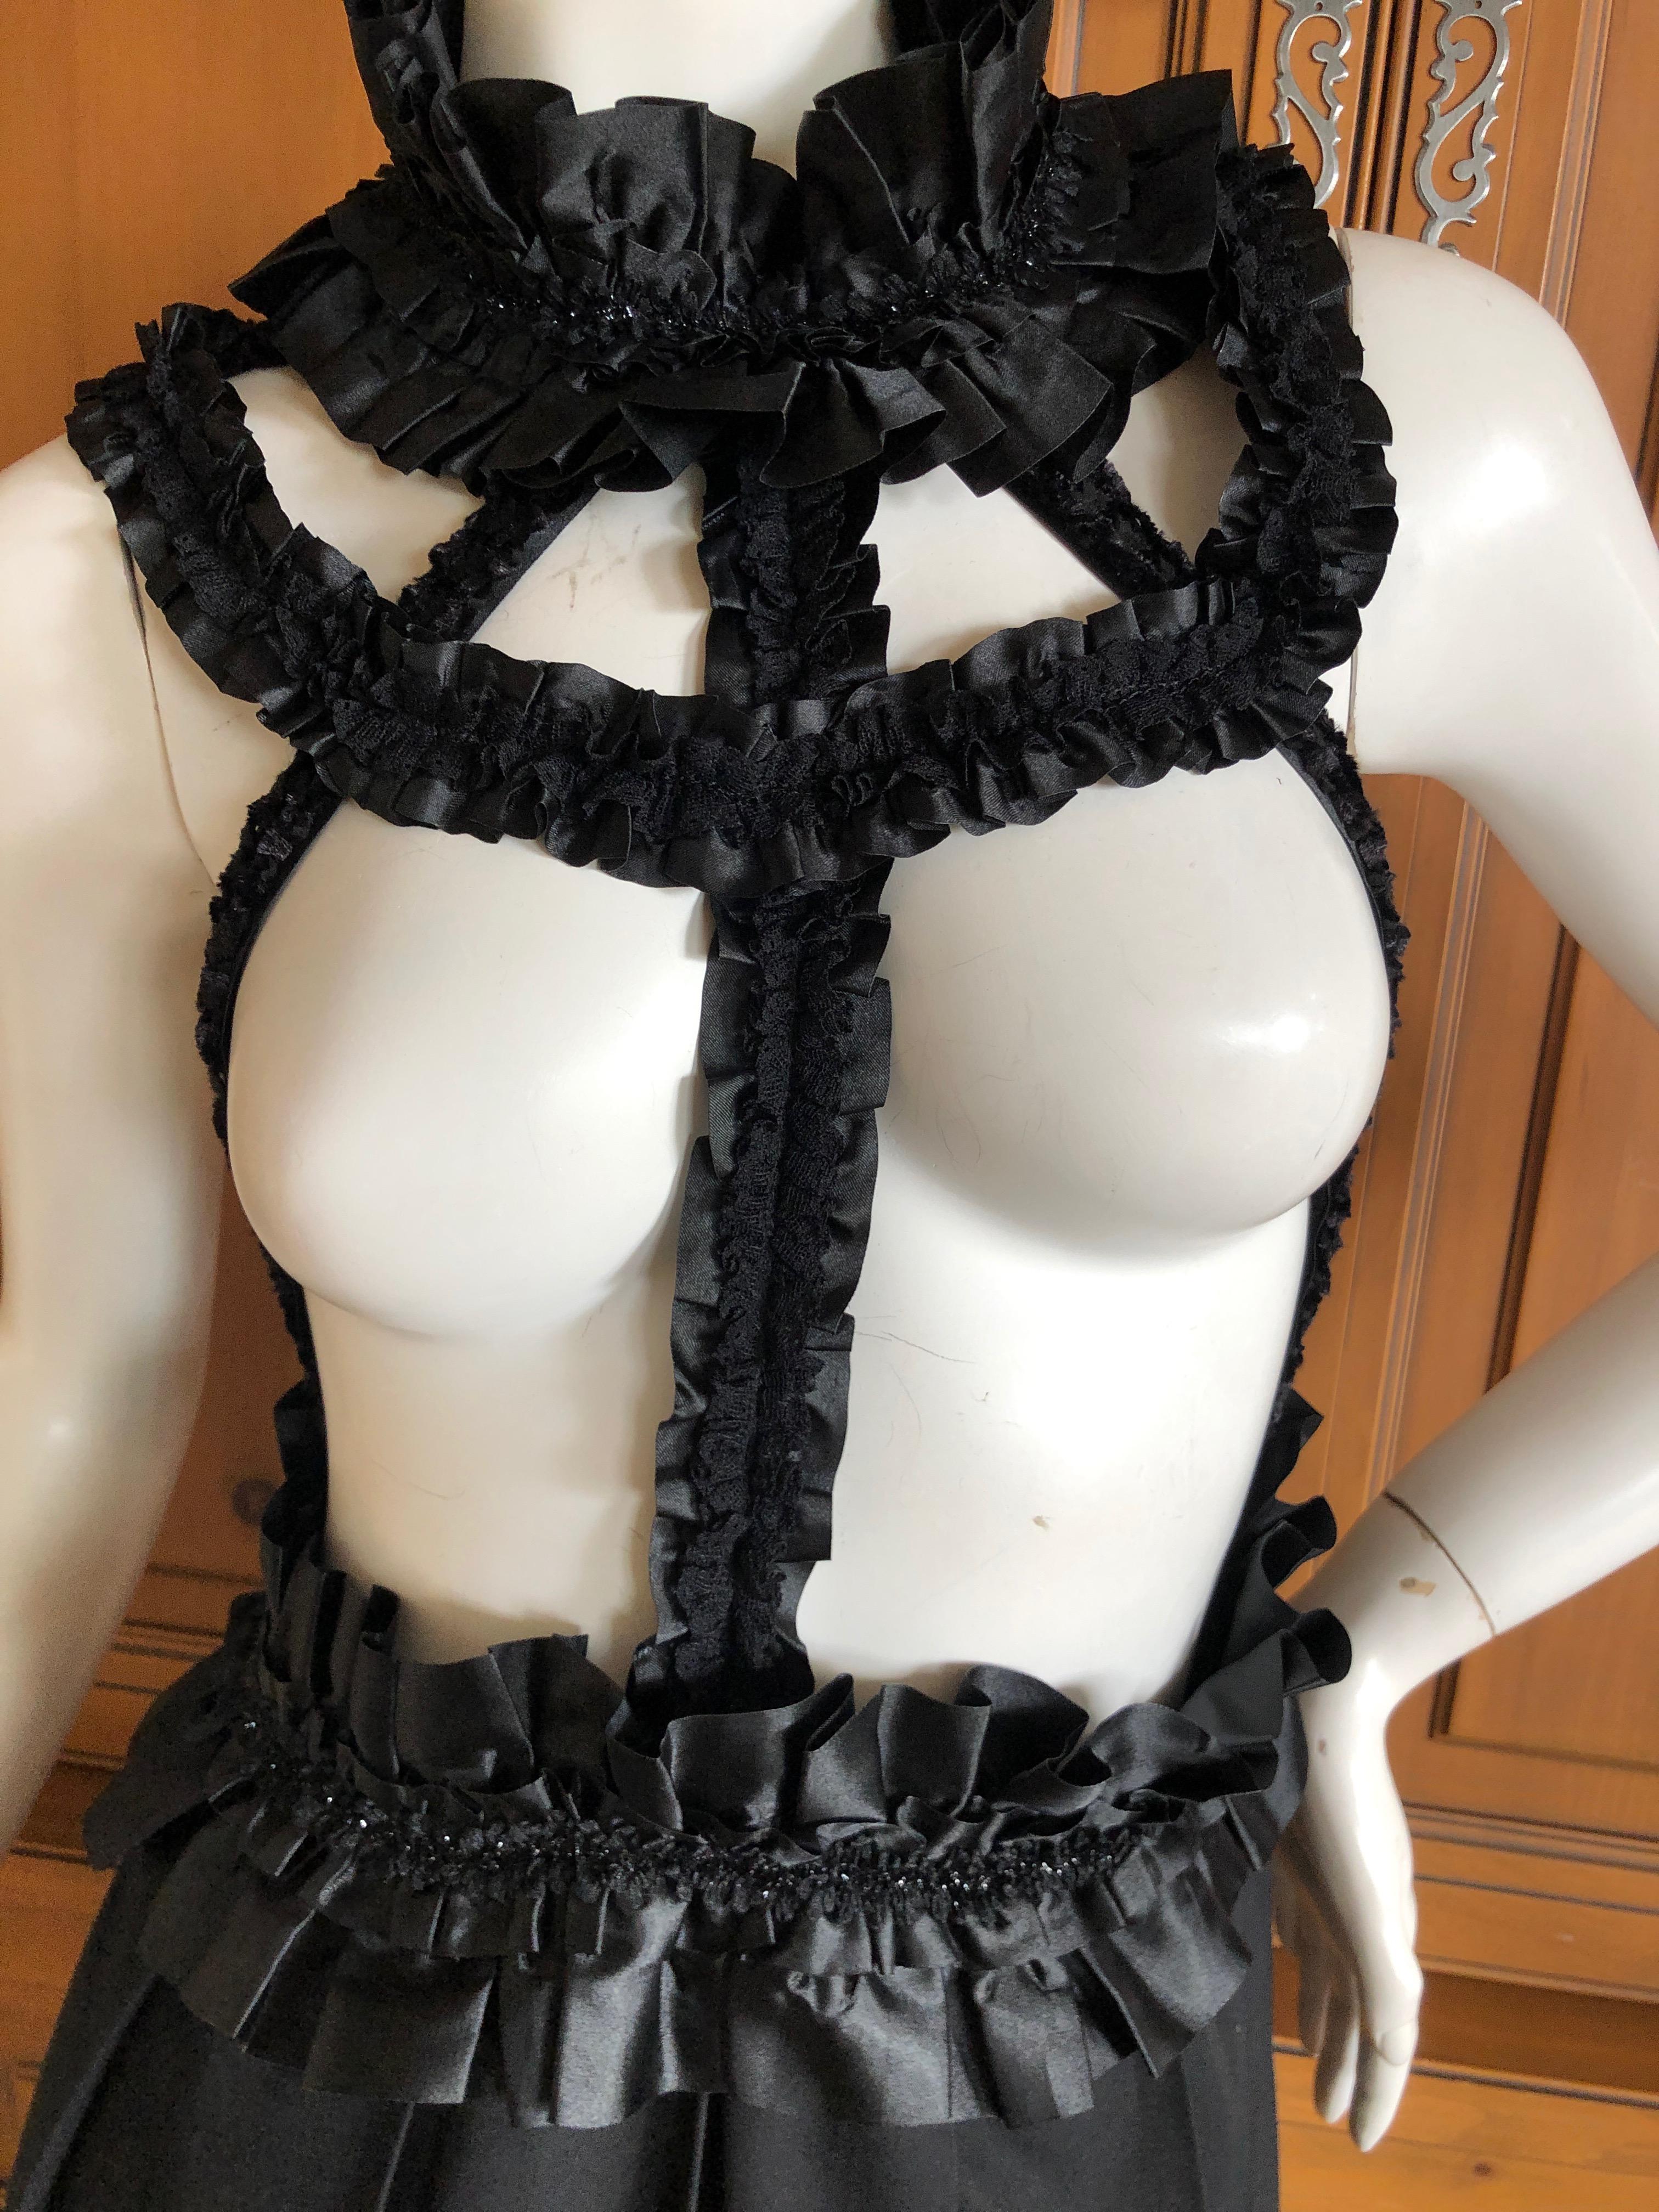 Comme des Garcons by Rei Kawakubo Ruffled Black Bondage Dress Autumn 2008 In New Condition For Sale In Cloverdale, CA